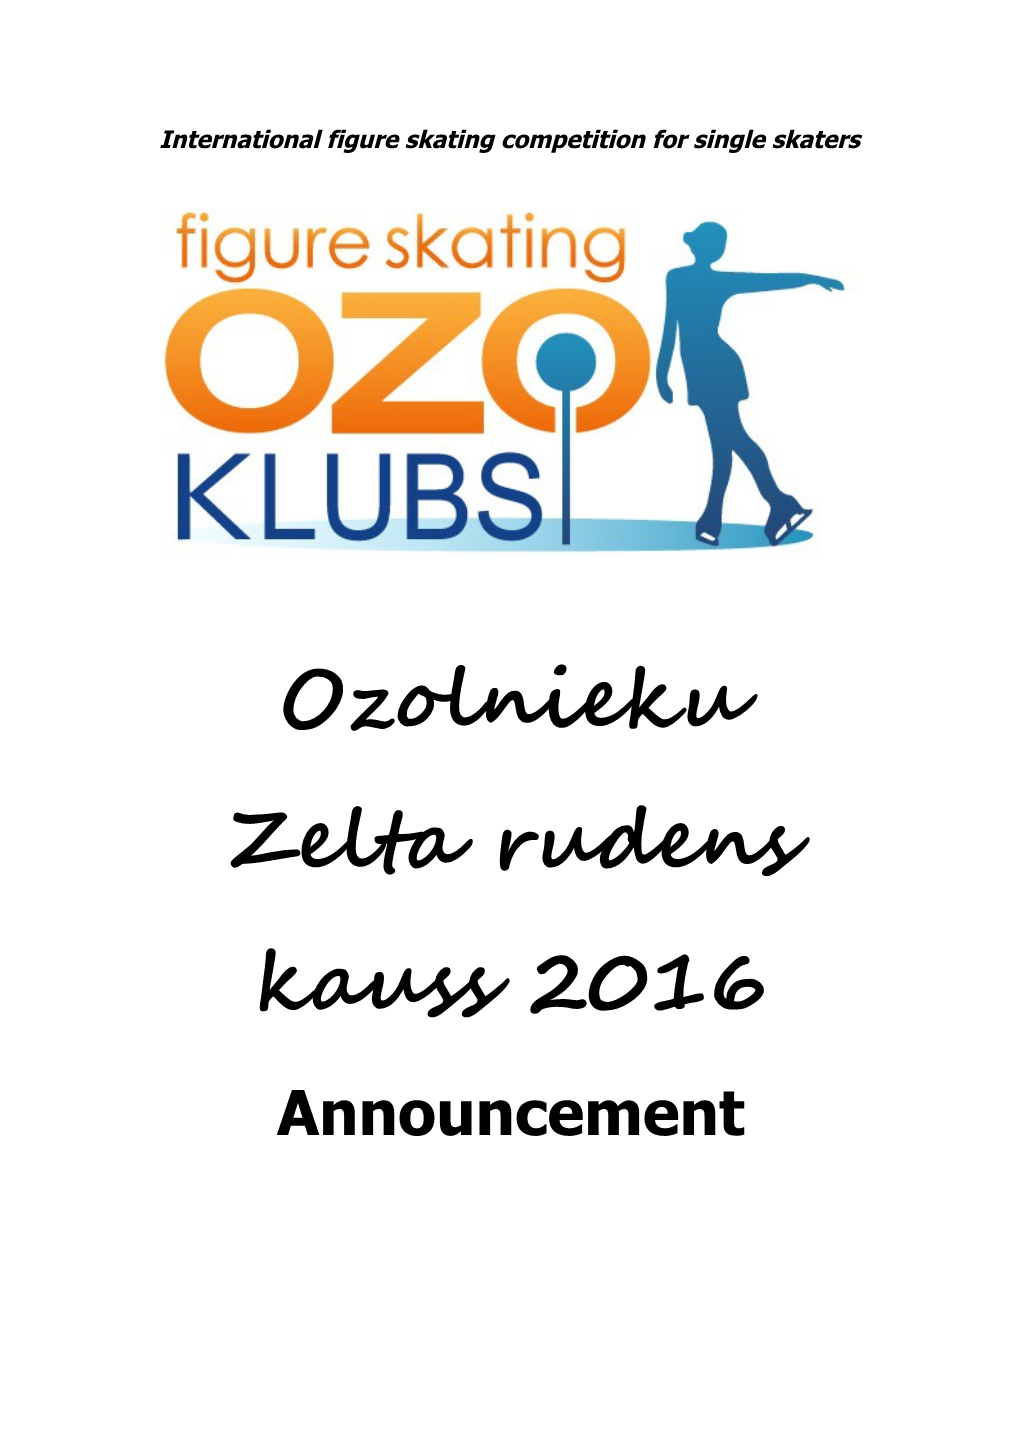 International Figure Skating Competition for Single Skaters